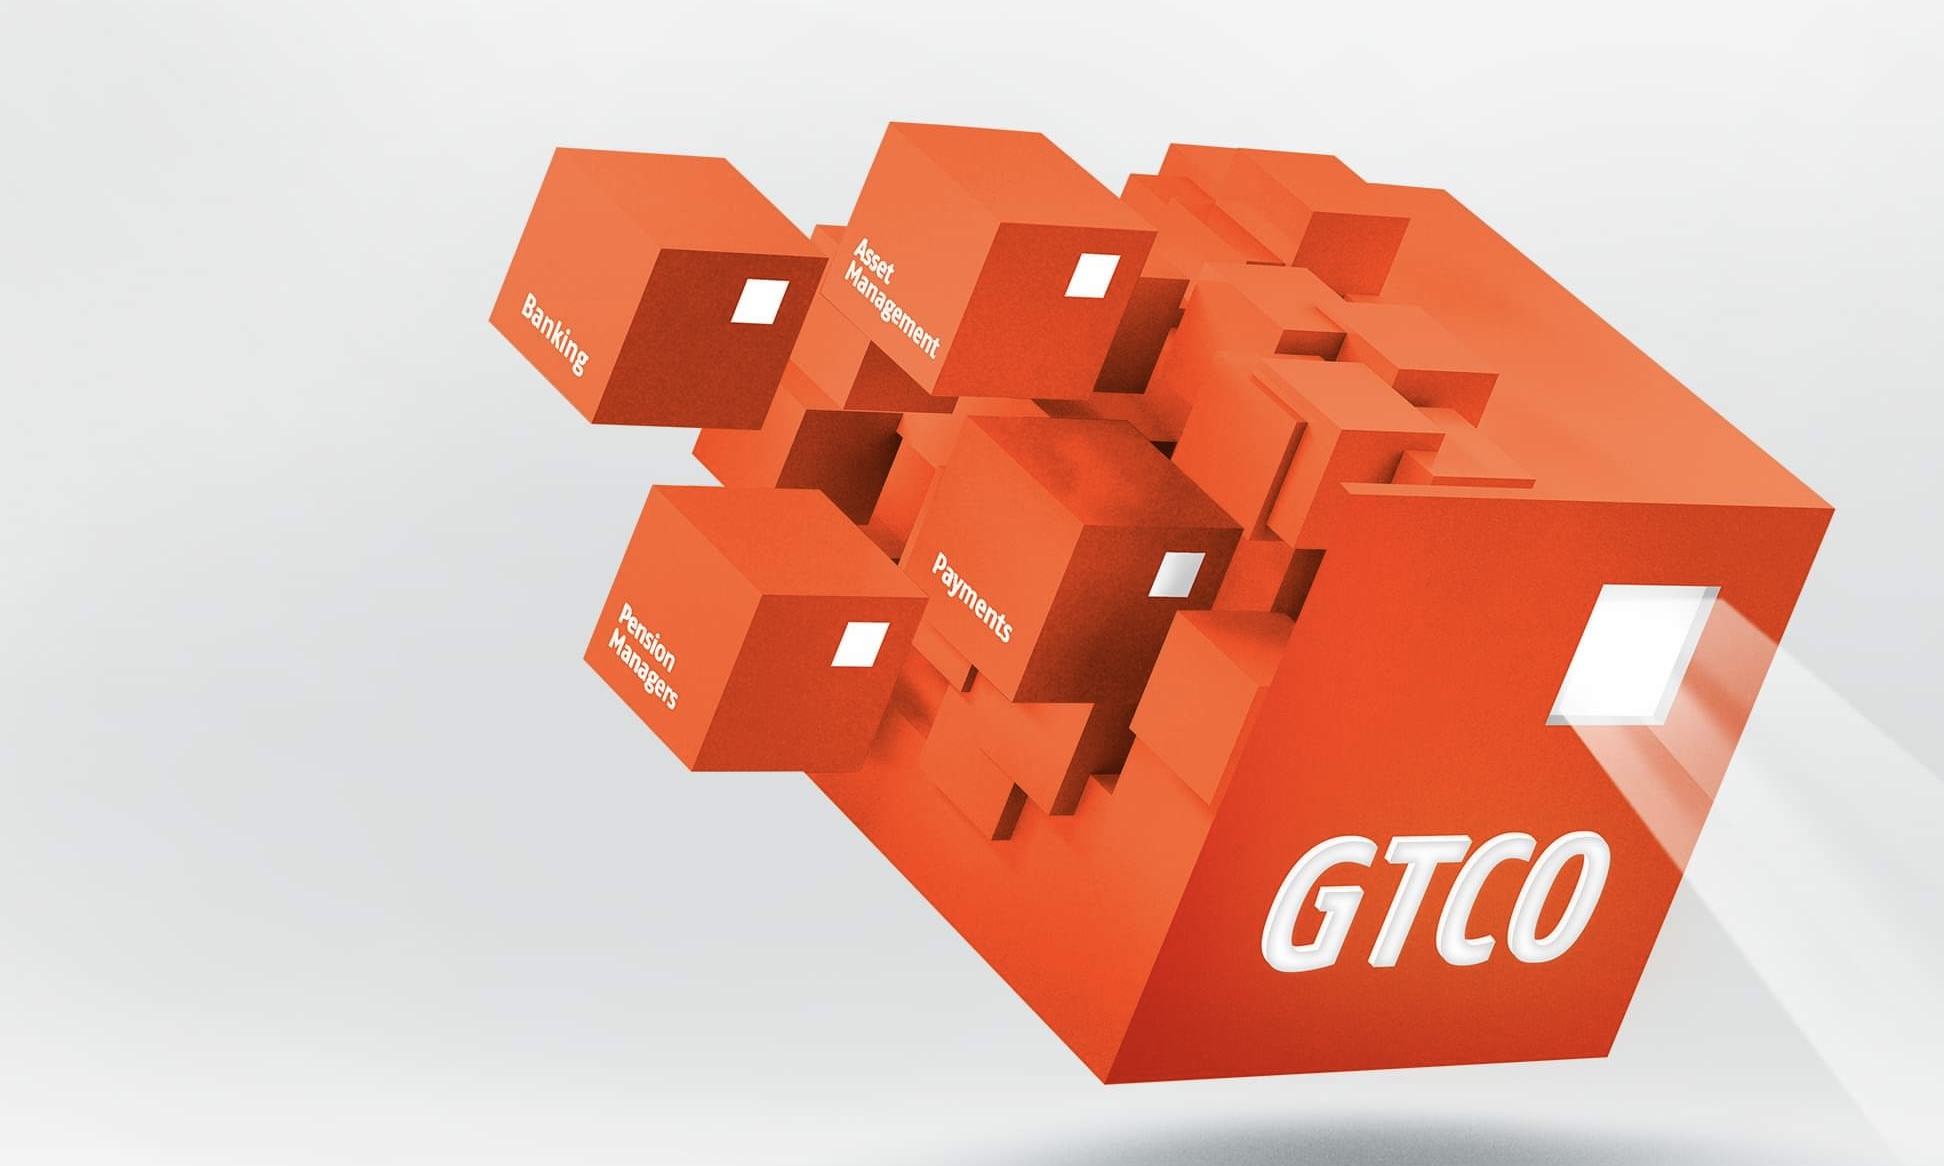 GTCO’s profit before tax rises 11.7% to N169.7bn in Q3 2022